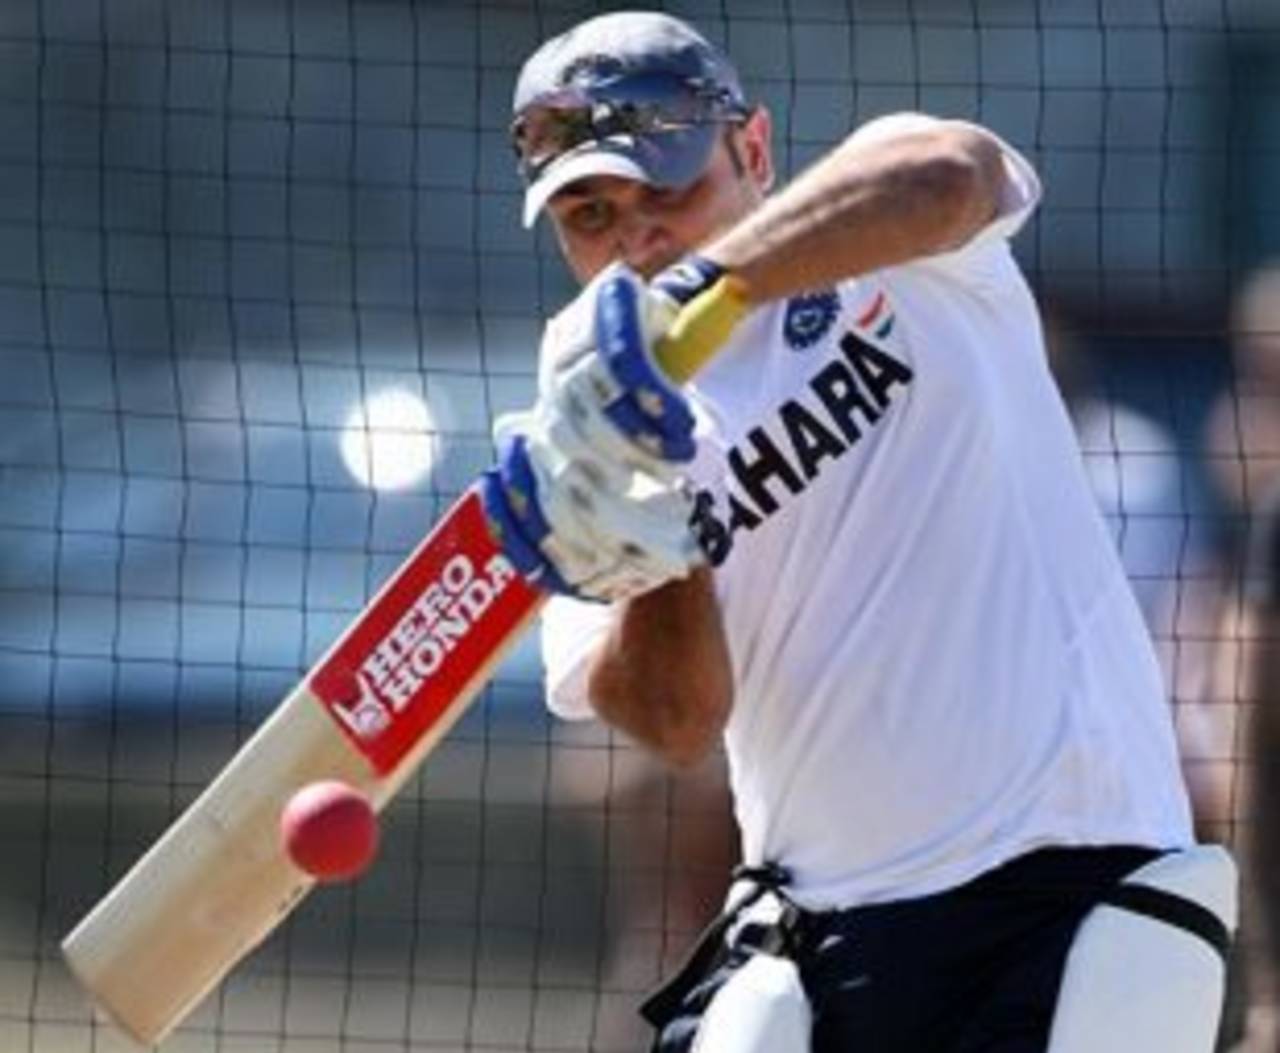 Virender Sehwag bats, Napier, March 2, 200